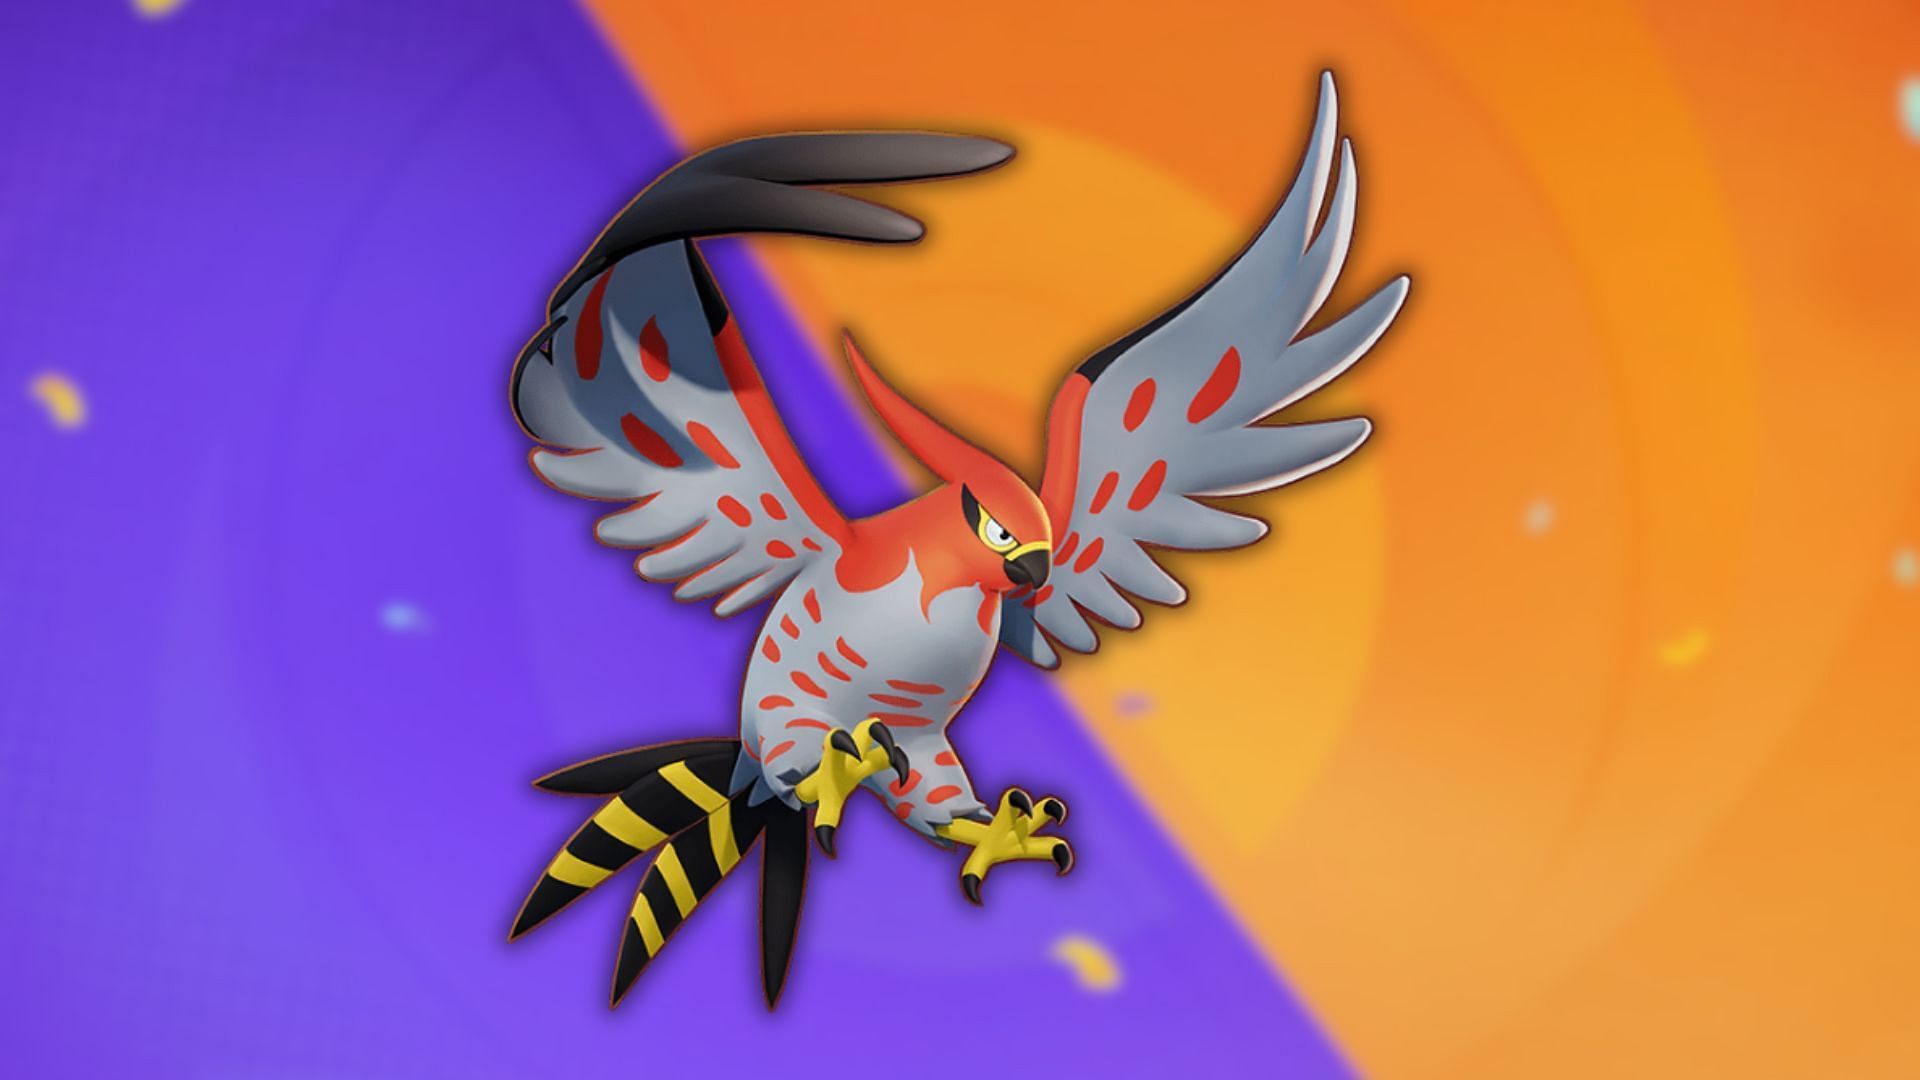 Talonflame in the game (Image via The Pokemon Company)